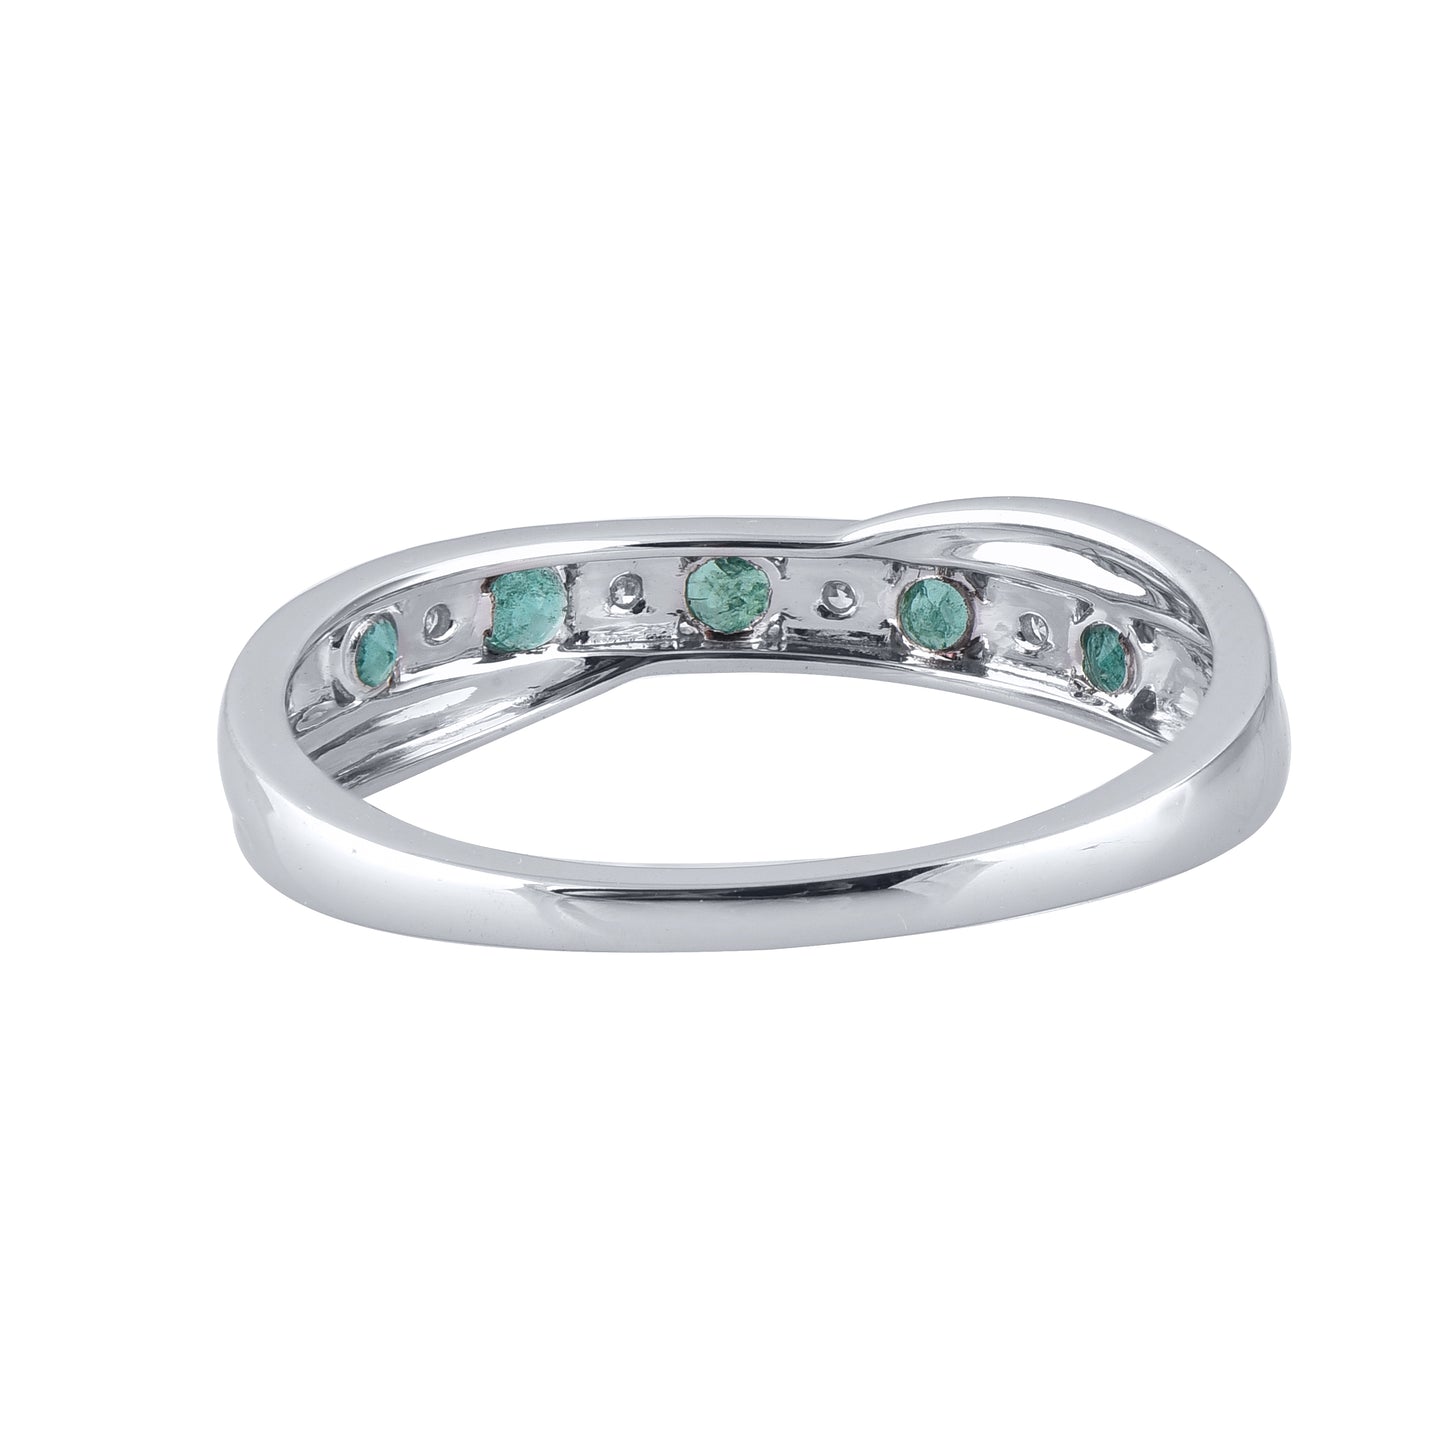 Diamond and Green Sapphire Criss-cross Ring in 10K Gold